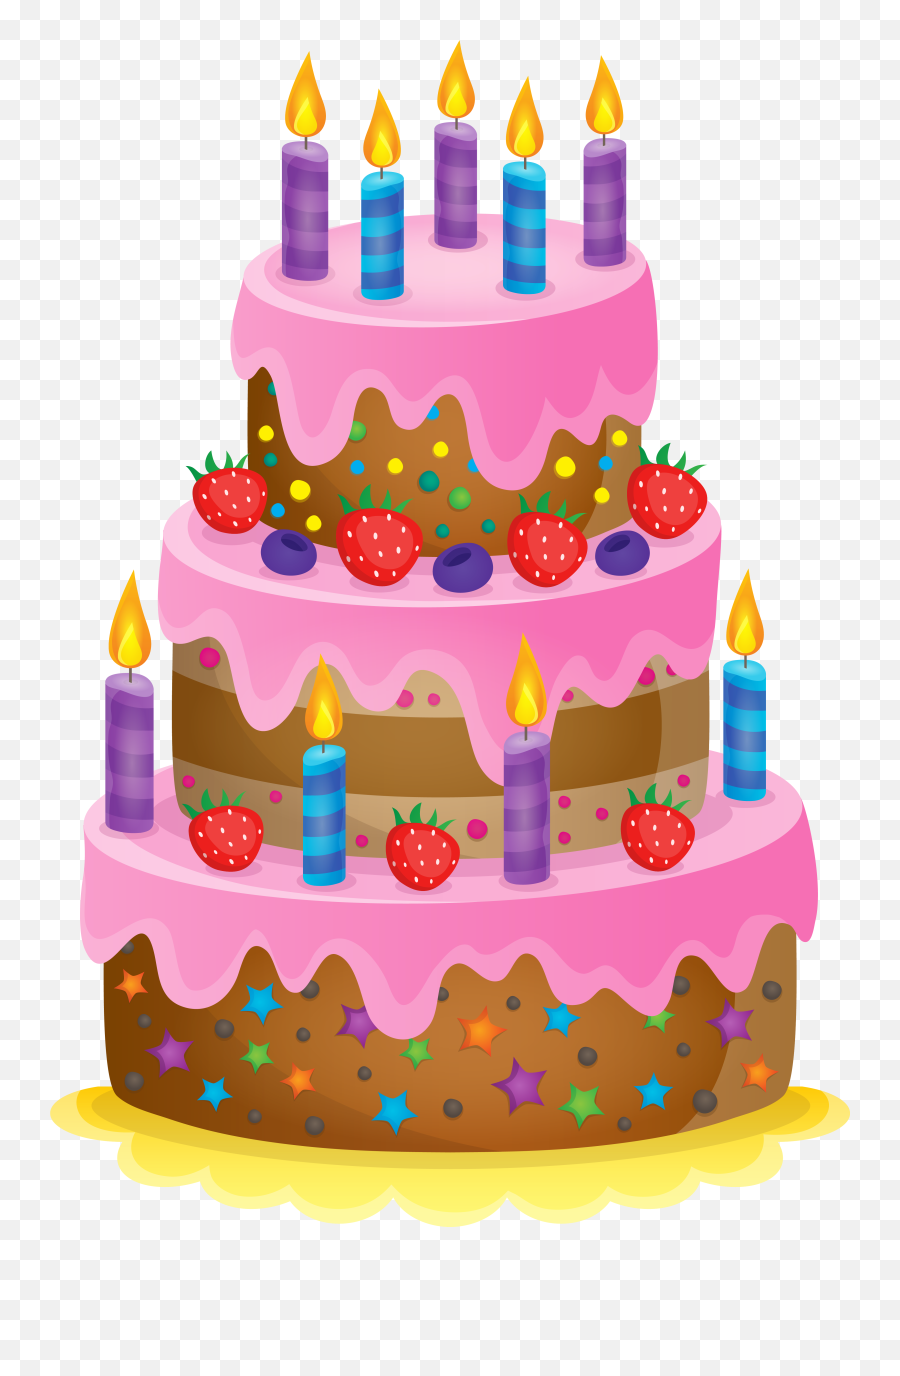 Cute Cake Png Clipart Image - Cake Happy Birthday Clipart Emoji,Cake Clipart